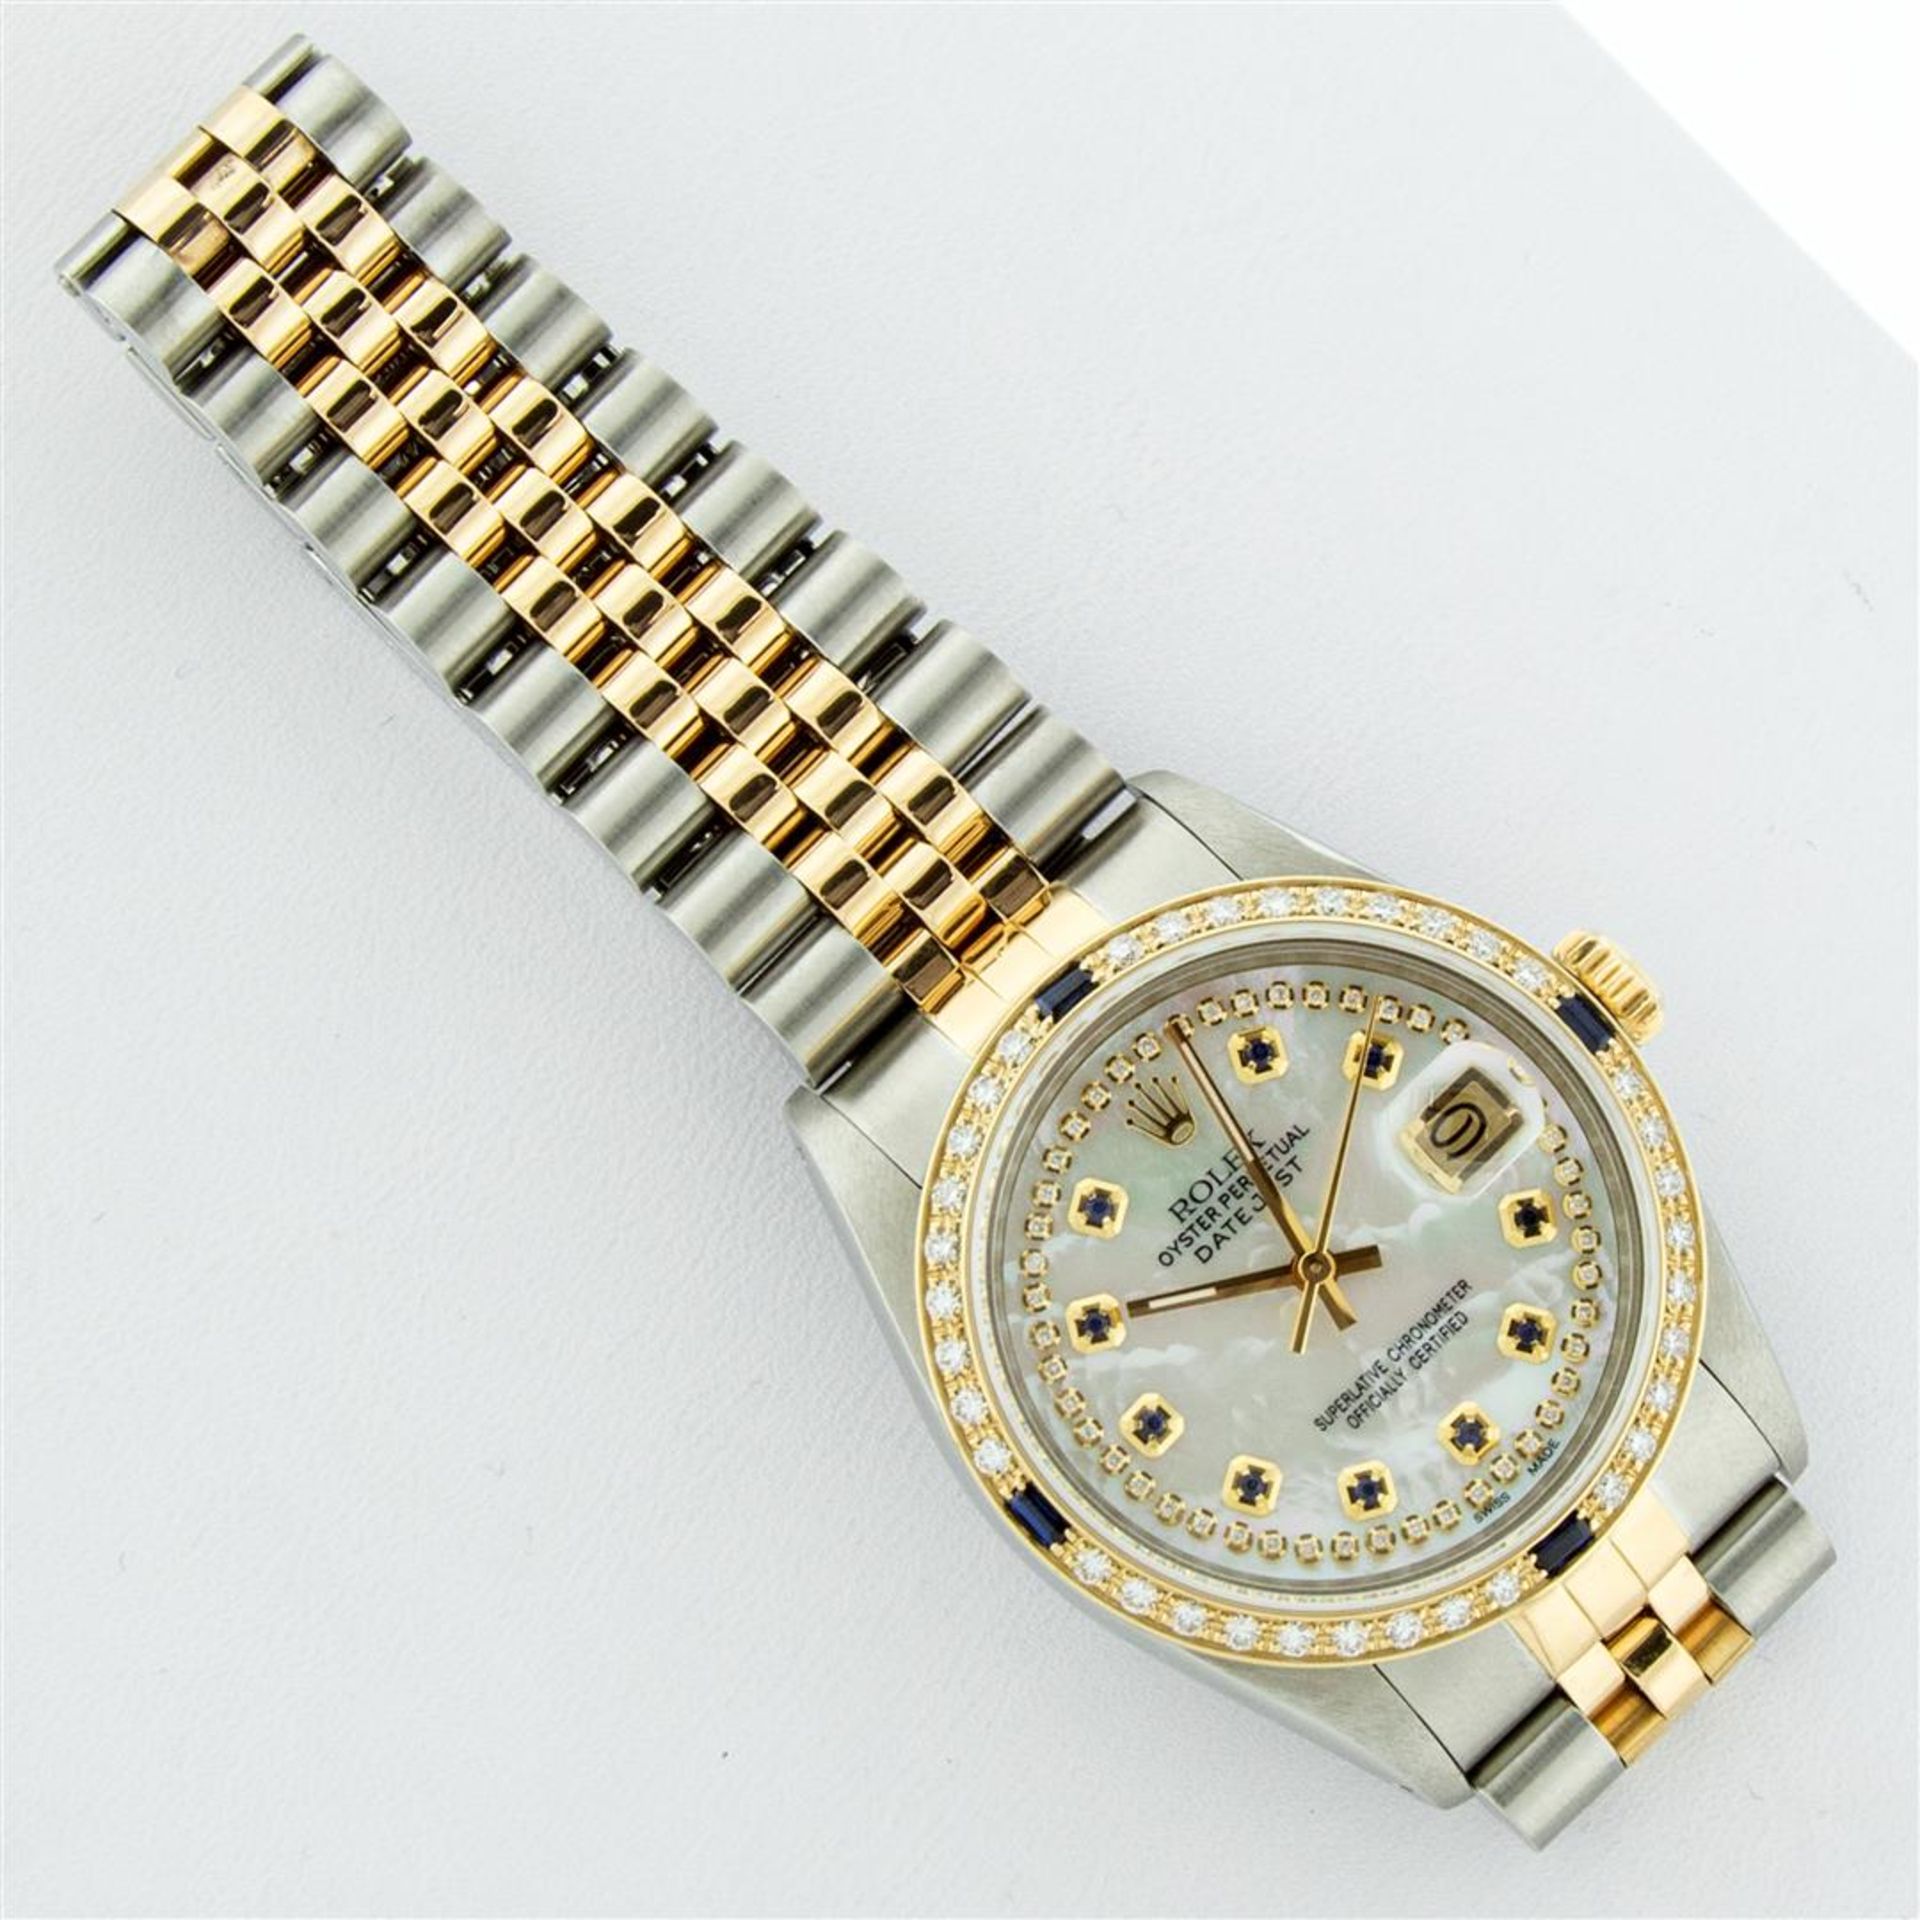 Rolex Mens 2 Tone Mother Of Pearl Diamond & Sapphire Datejust Wristwatch - Image 6 of 9